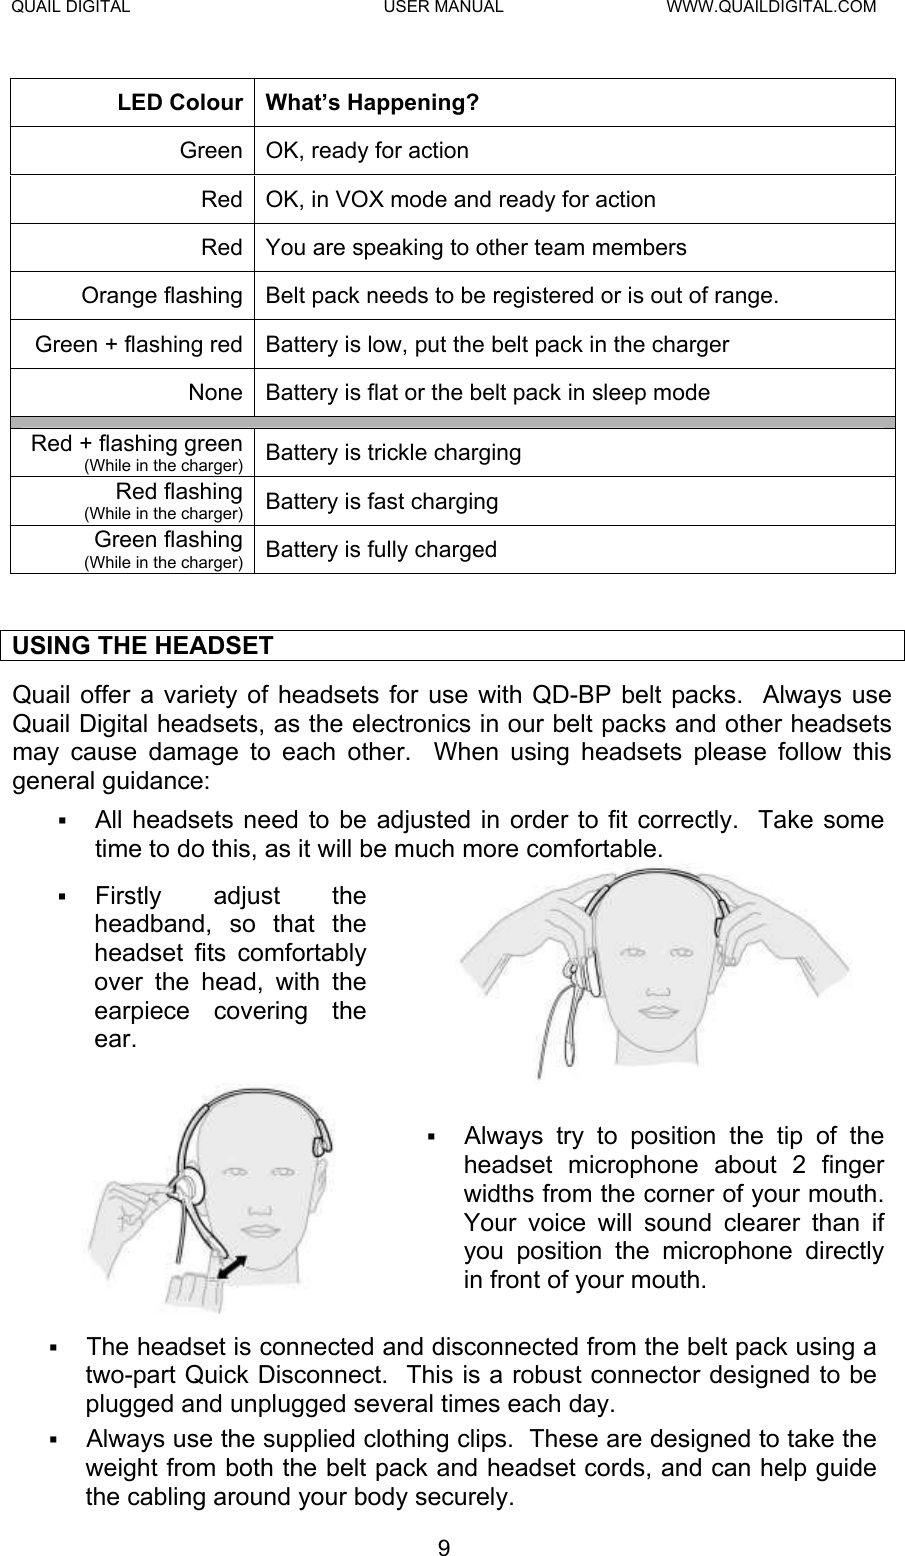 QUAIL DIGITAL  USER MANUAL  WWW.QUAILDIGITAL.COM  LED Colour  What’s Happening? Green  OK, ready for action Red  OK, in VOX mode and ready for action Red  You are speaking to other team members Orange flashing  Belt pack needs to be registered or is out of range. Green + flashing red  Battery is low, put the belt pack in the charger None  Battery is flat or the belt pack in sleep mode  Red + flashing green (While in the charger) Battery is trickle charging Red flashing  (While in the charger) Battery is fast charging Green flashing (While in the charger) Battery is fully charged   USING THE HEADSET Quail offer a variety of headsets for use with QD-BP belt packs.  Always use Quail Digital headsets, as the electronics in our belt packs and other headsets may cause damage to each other.  When using headsets please follow this general guidance:   All headsets need to be adjusted in order to fit correctly.  Take some time to do this, as it will be much more comfortable.    Firstly adjust the headband, so that the headset fits comfortably over the head, with the earpiece covering the ear.     Always try to position the tip of the headset microphone about 2 finger widths from the corner of your mouth.  Your voice will sound clearer than if you position the microphone directly in front of your mouth.   The headset is connected and disconnected from the belt pack using a two-part Quick Disconnect.  This is a robust connector designed to be plugged and unplugged several times each day.   Always use the supplied clothing clips.  These are designed to take the weight from both the belt pack and headset cords, and can help guide the cabling around your body securely. 9  